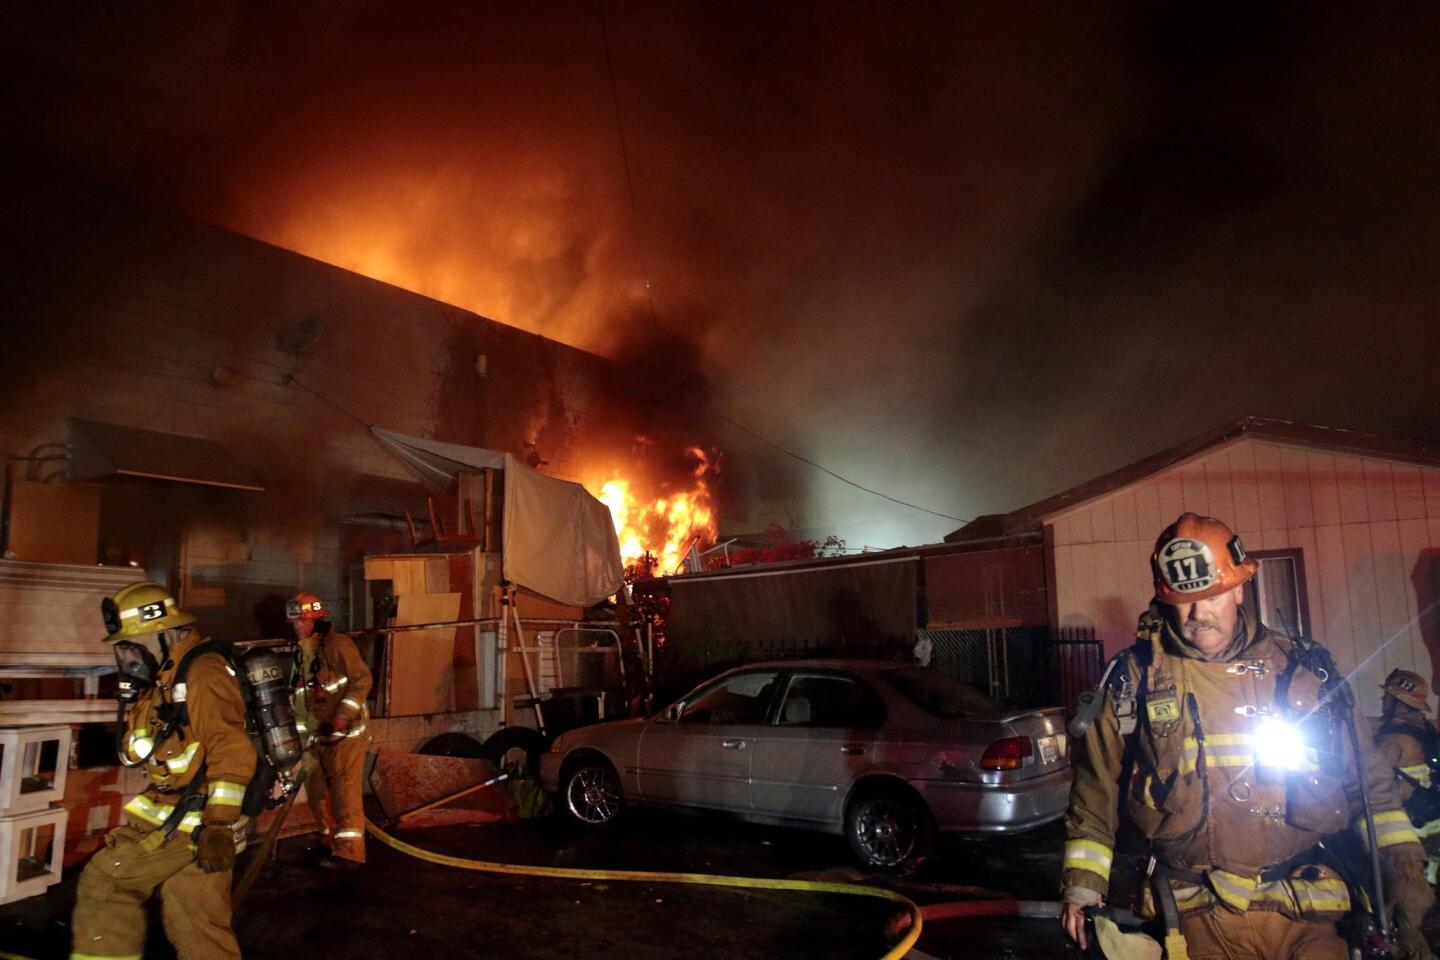 Firefighters battle a stubborn fire that raged in Boyle Heights early Thursday morning, causing extensive damage to a commercial building containing four businesses in the 3700 block of Whittier Boulevard.